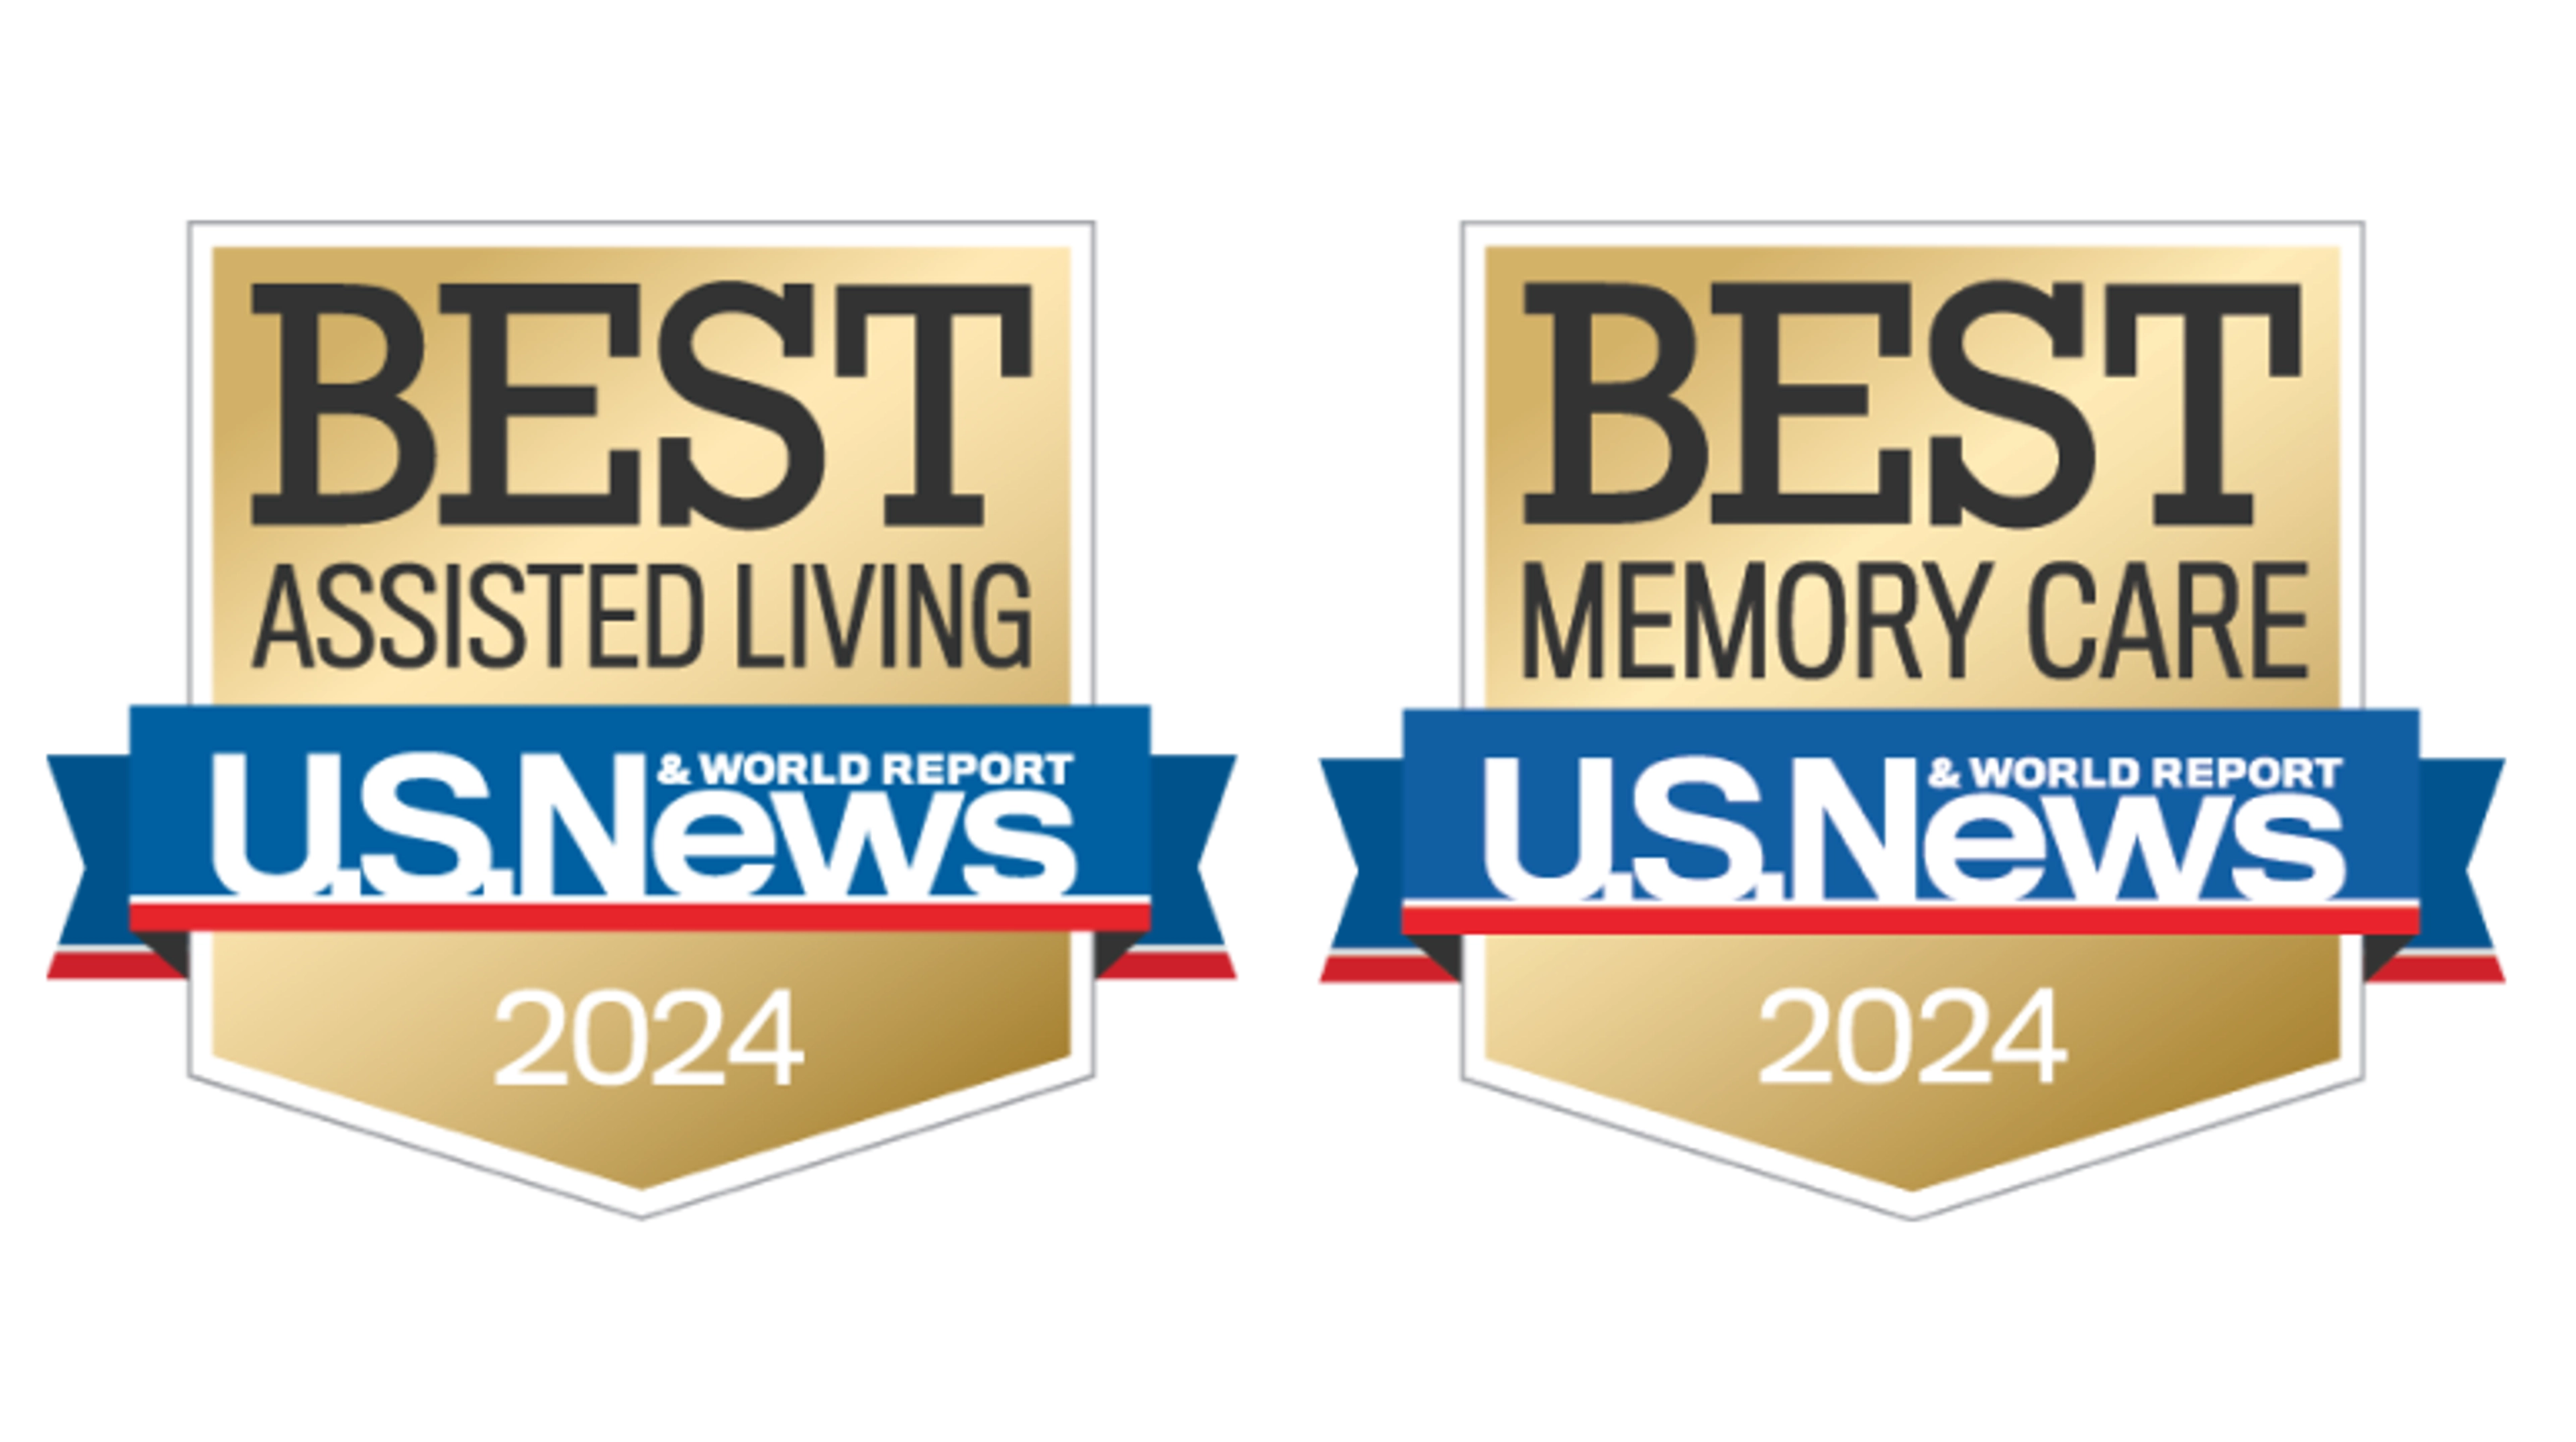 Best Assisted Living, Best Memory Care